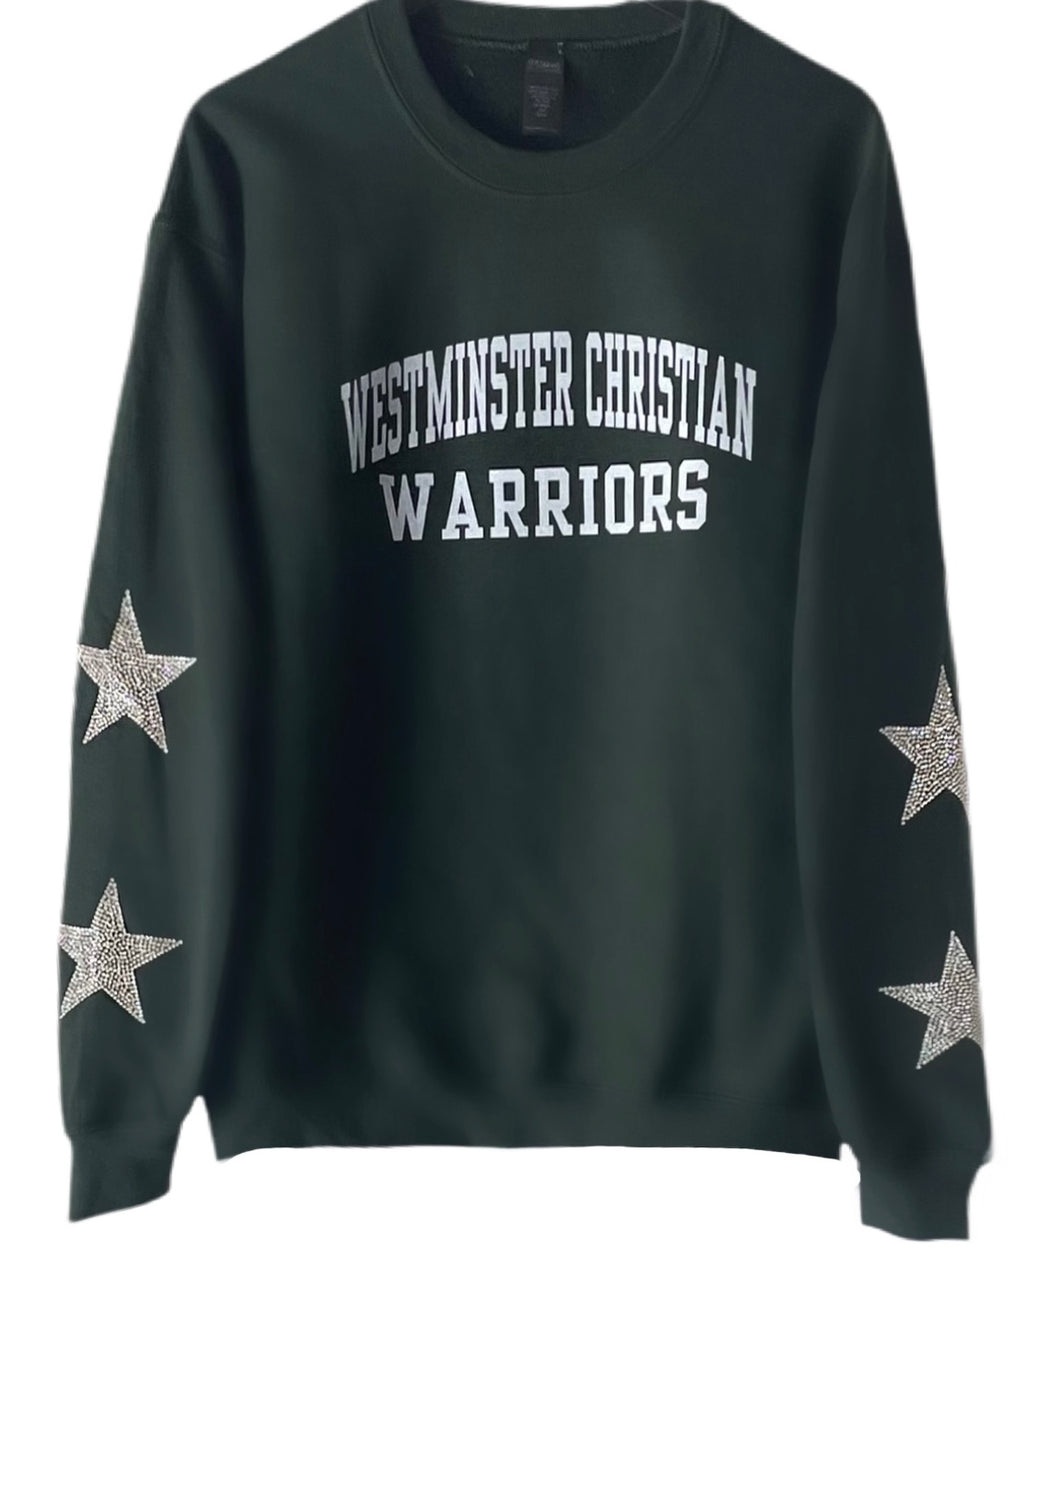 Westminster Christian School, One of a KIND Sweatshirt with Crystal Star Design